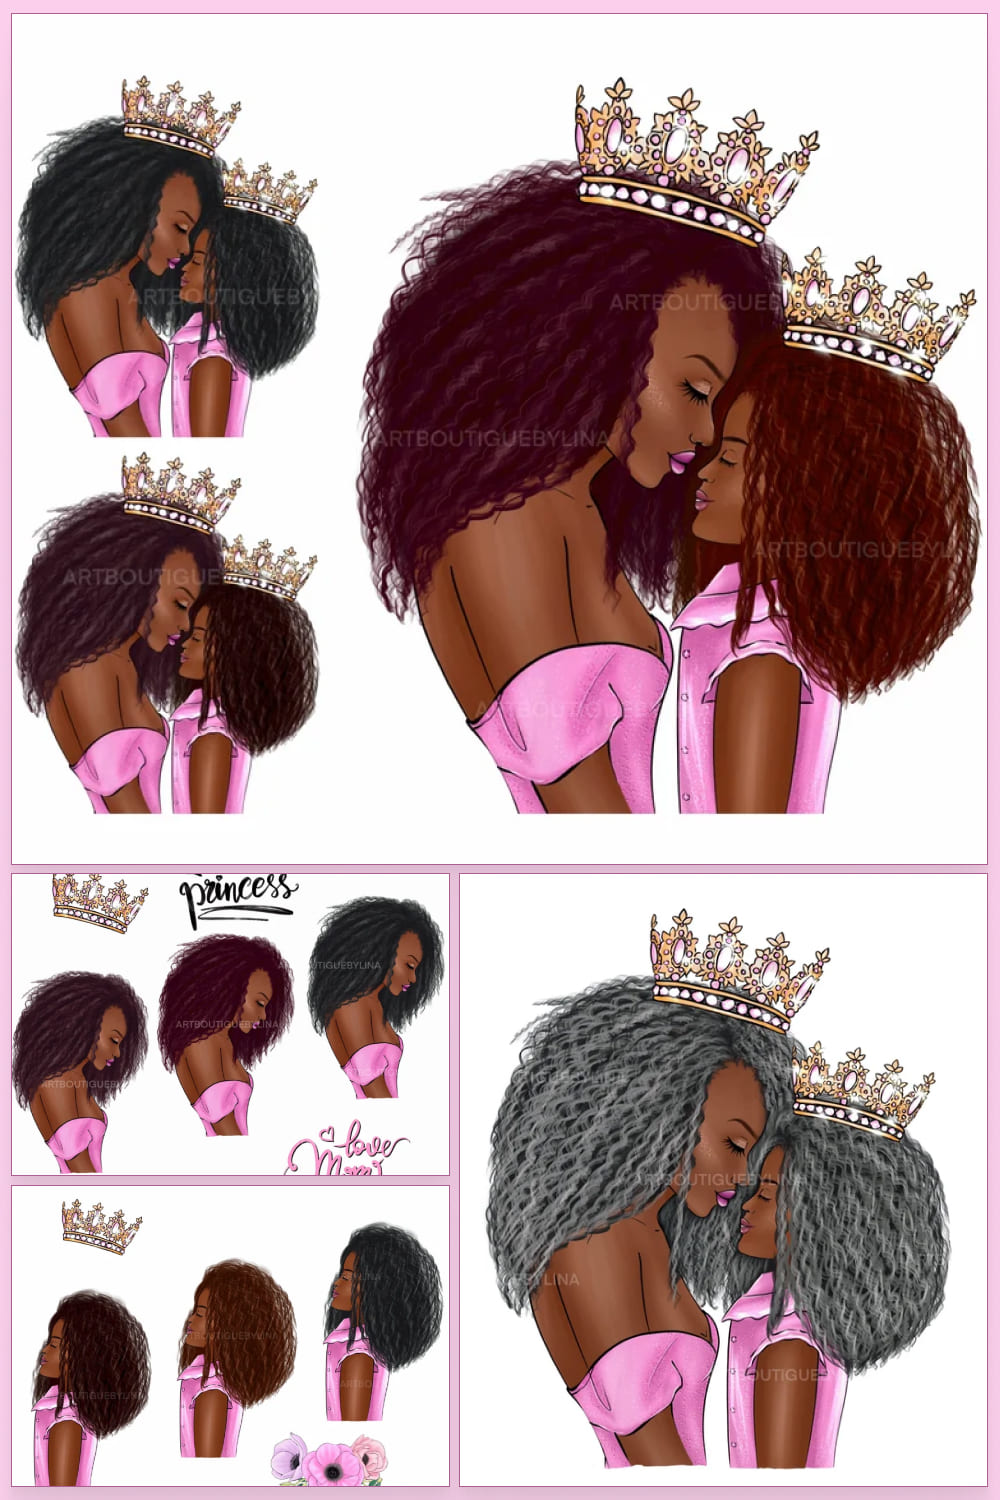 A collage of images of a black mother and daughter in pink clothes and a crown on their heads.